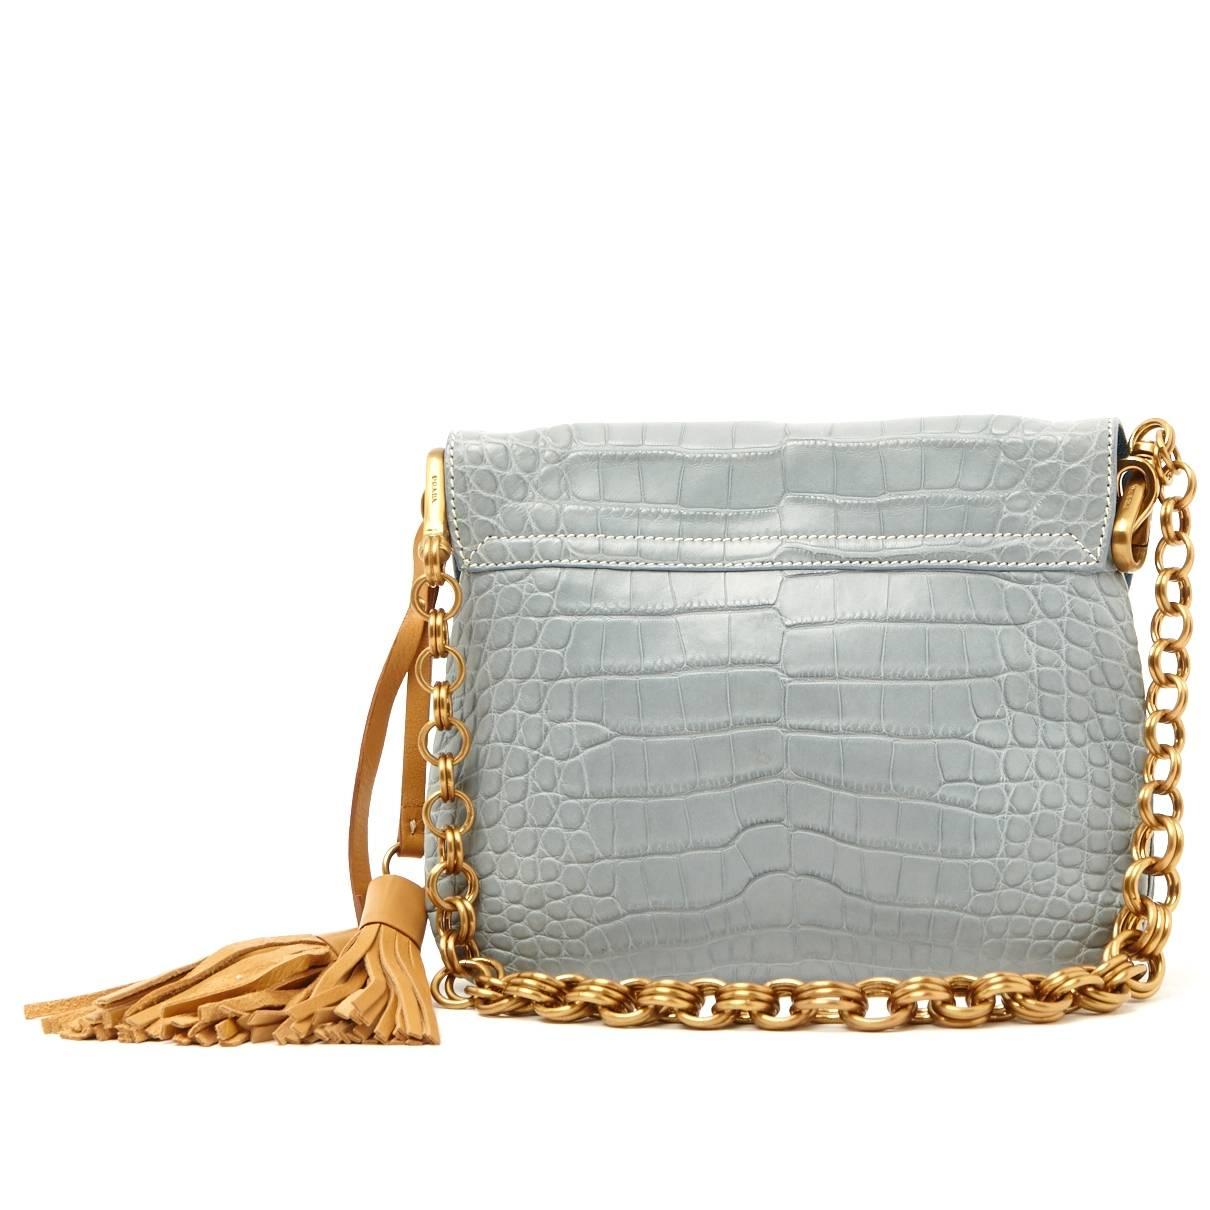 Wonderful babyblue Prada Alligator Bag
Amazing piece from Prada's Exotic Skin collections
Made of fine alligator skin that has been tanned using natural methods.
Heavy brass colored chain shoulder strap (can be detached), engraved discreetly with